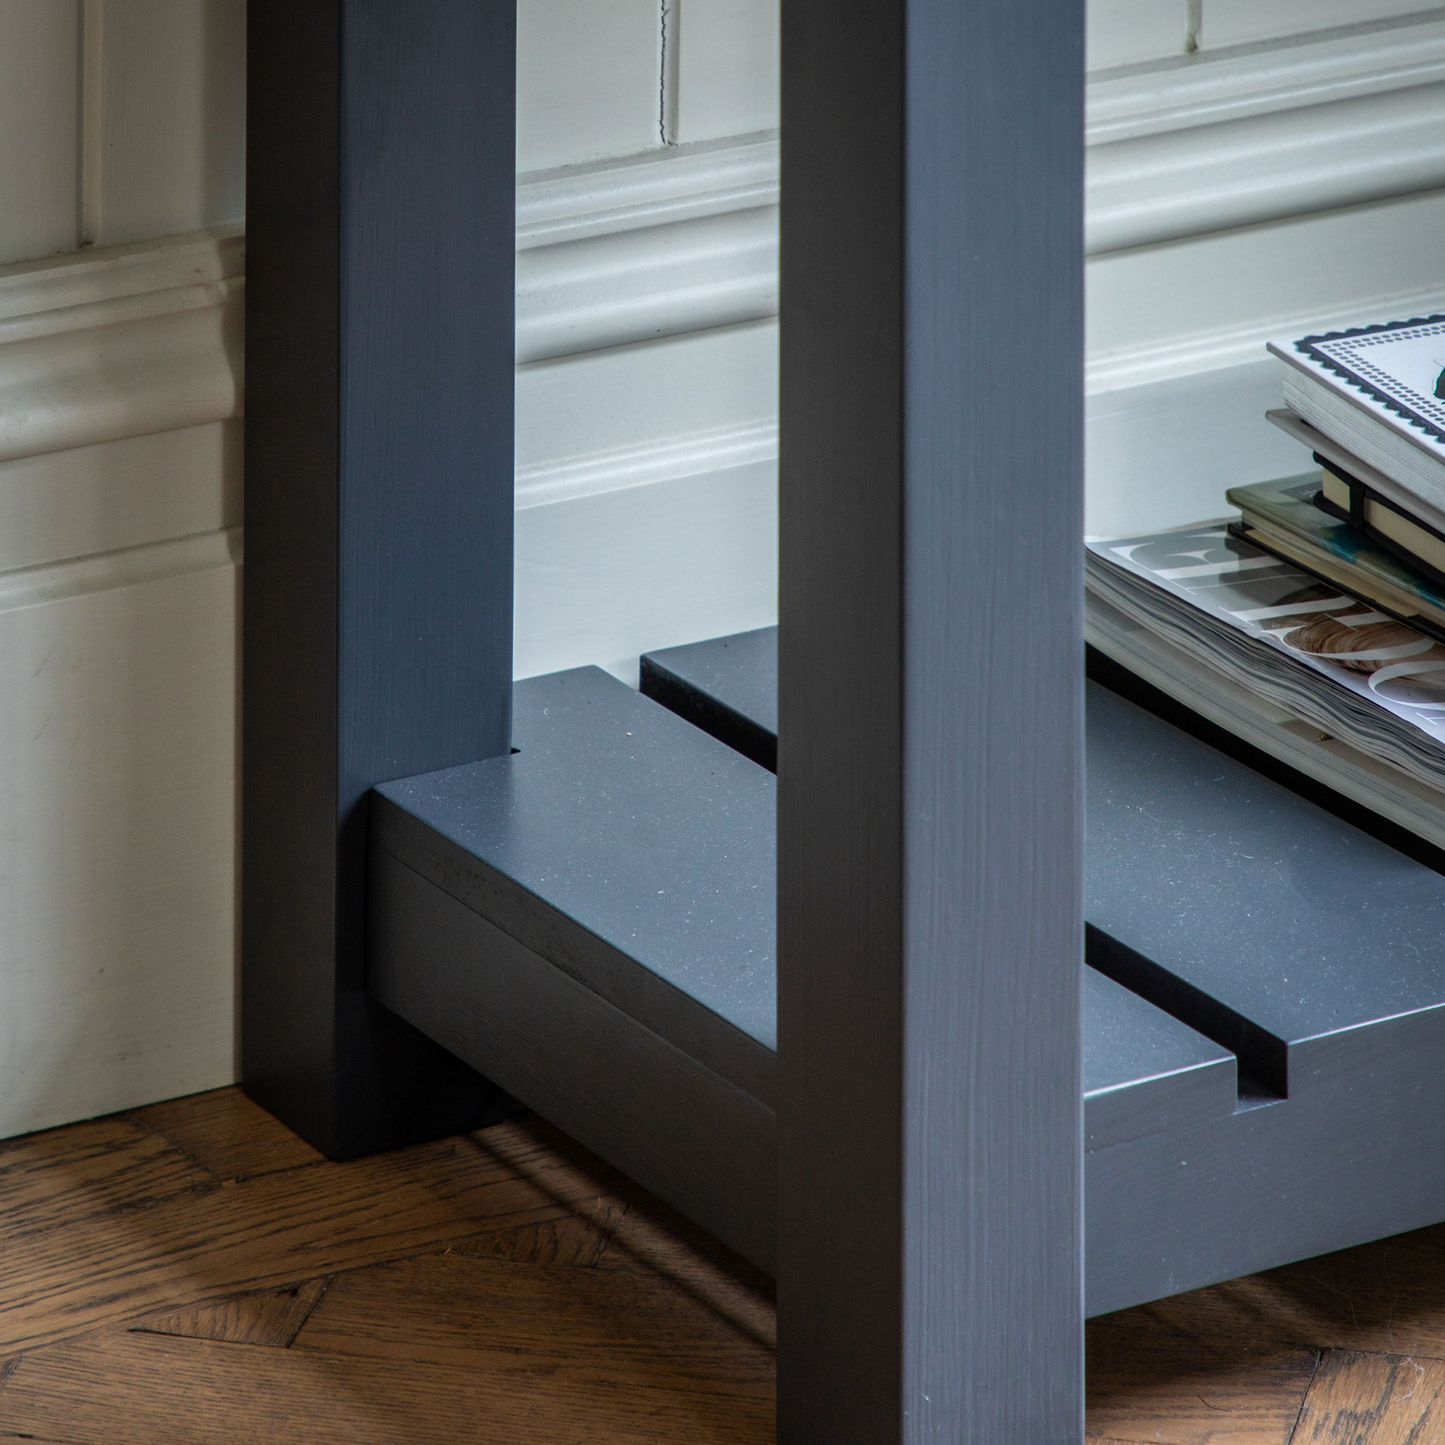 A Buckland Console Table from Kikiathome.co.uk with magazines on it, perfect for home furniture and interior decor.